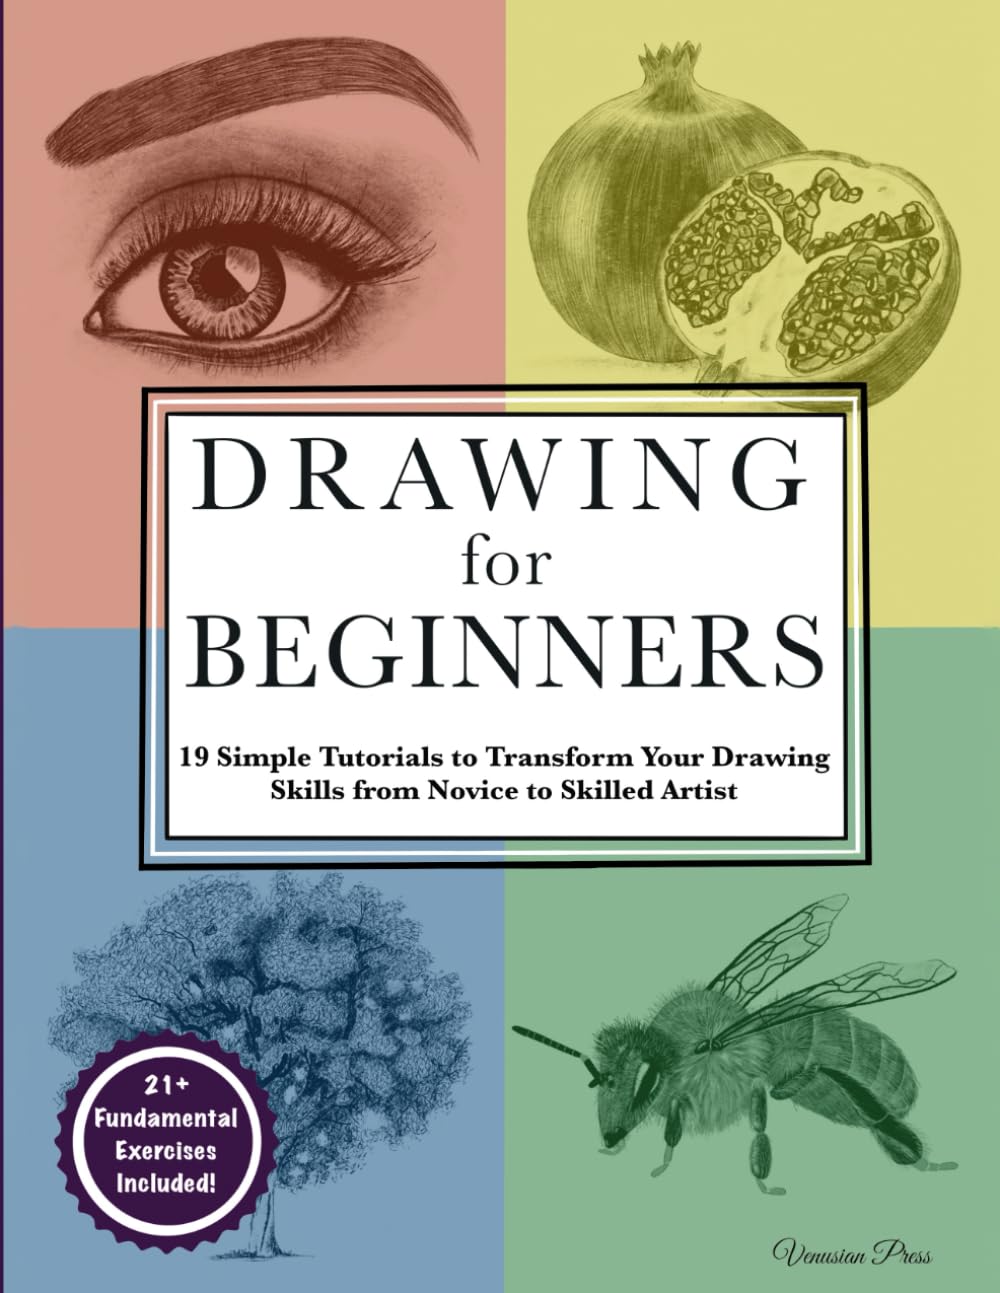 Drawing for Beginners: 19 Simple Tutorials to Transform Your Drawing Skills from Novice to Skilled Artist